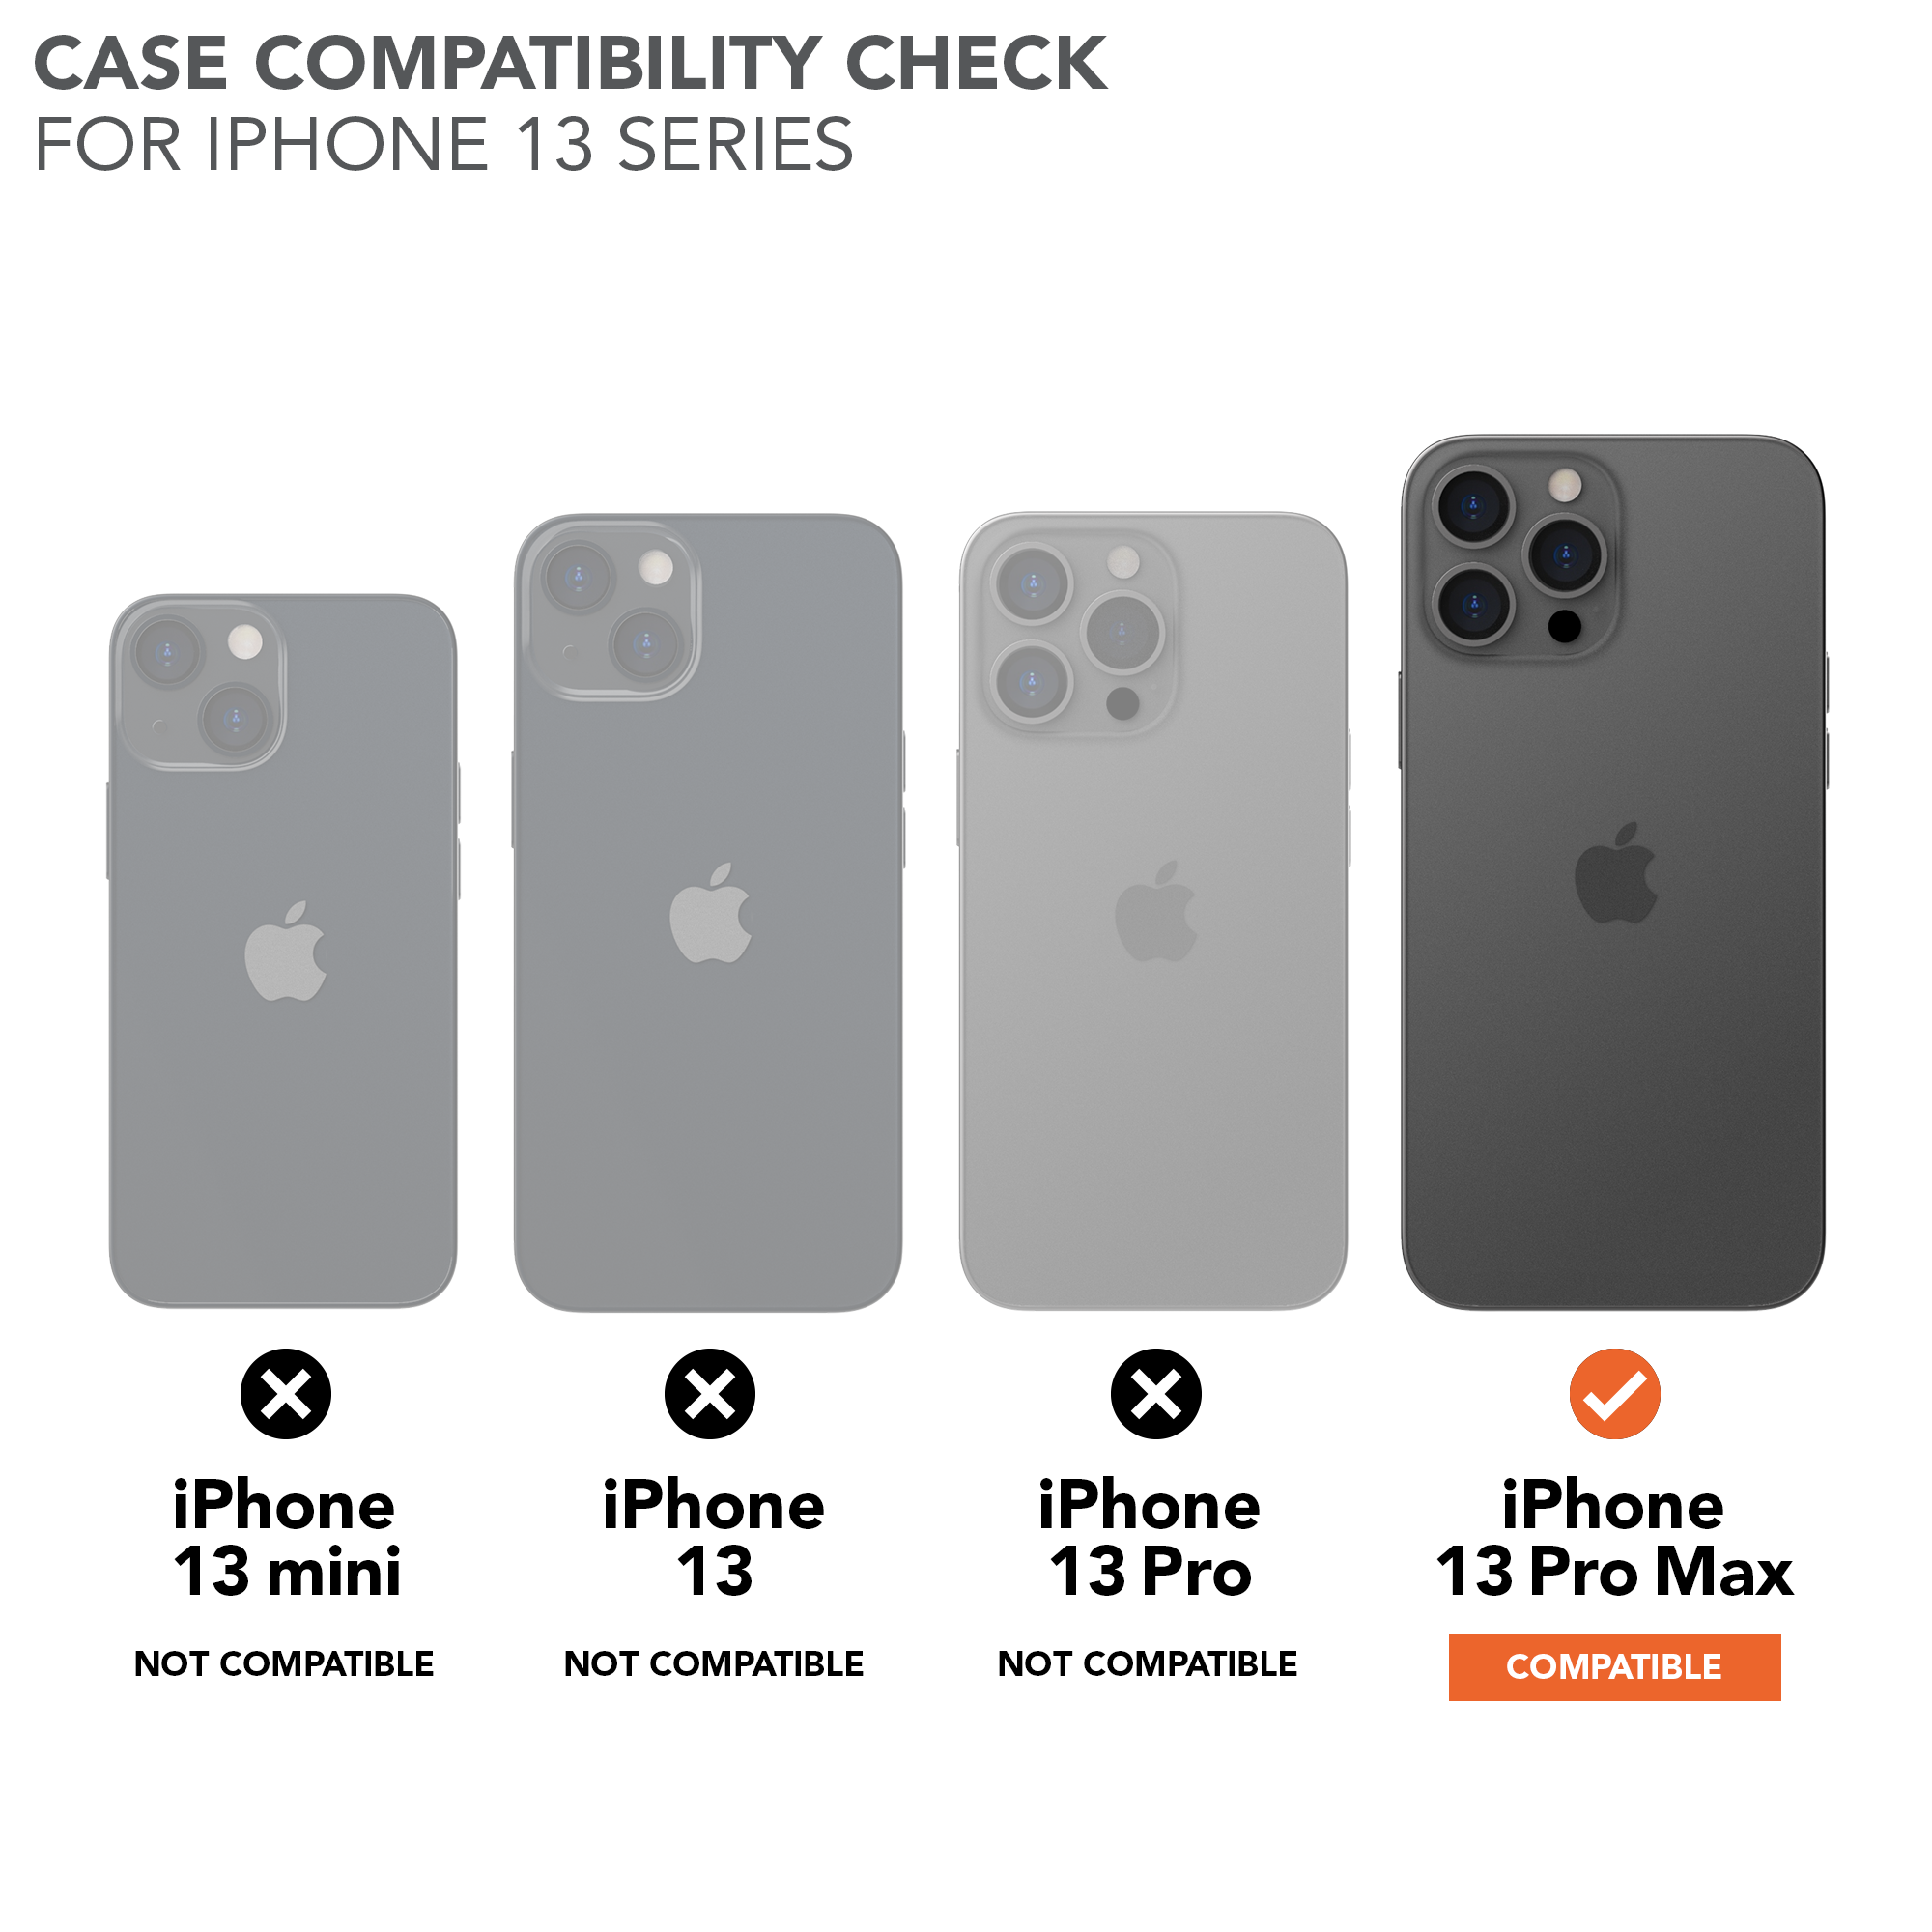 iPhone 12 vs iPhone 13 Case Compatibility